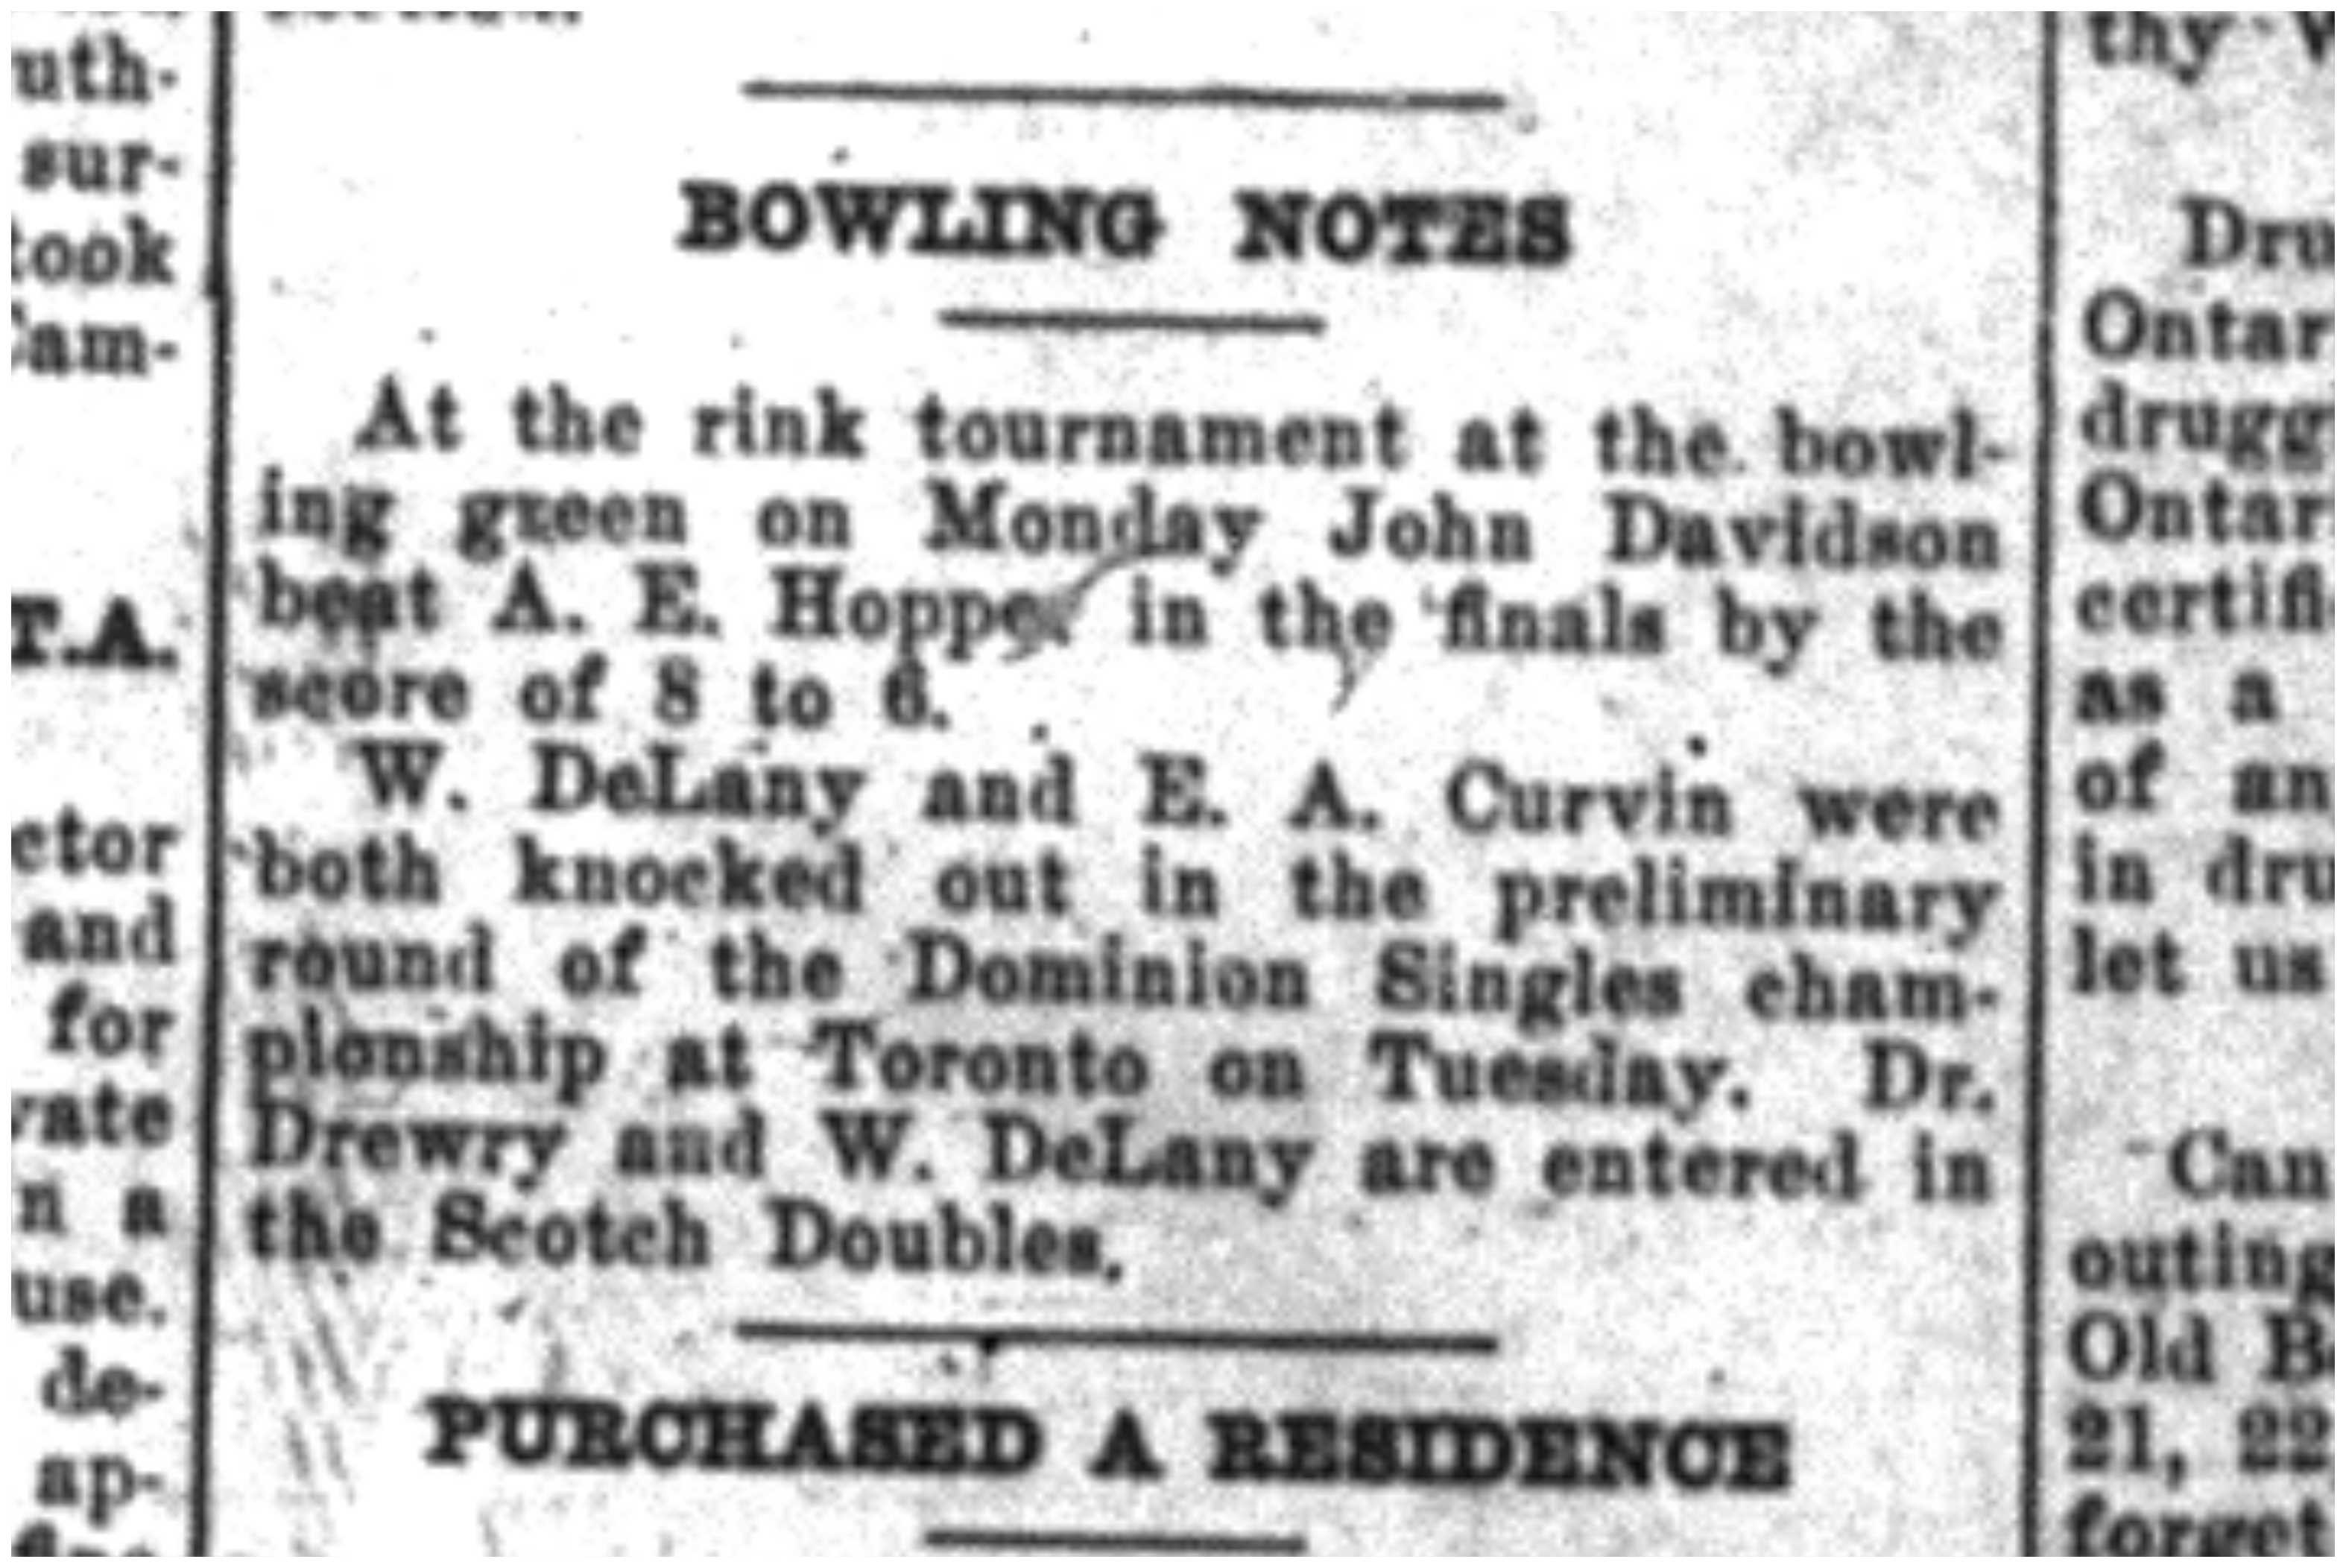 1920-09-09 Lawn Bowling -Notes